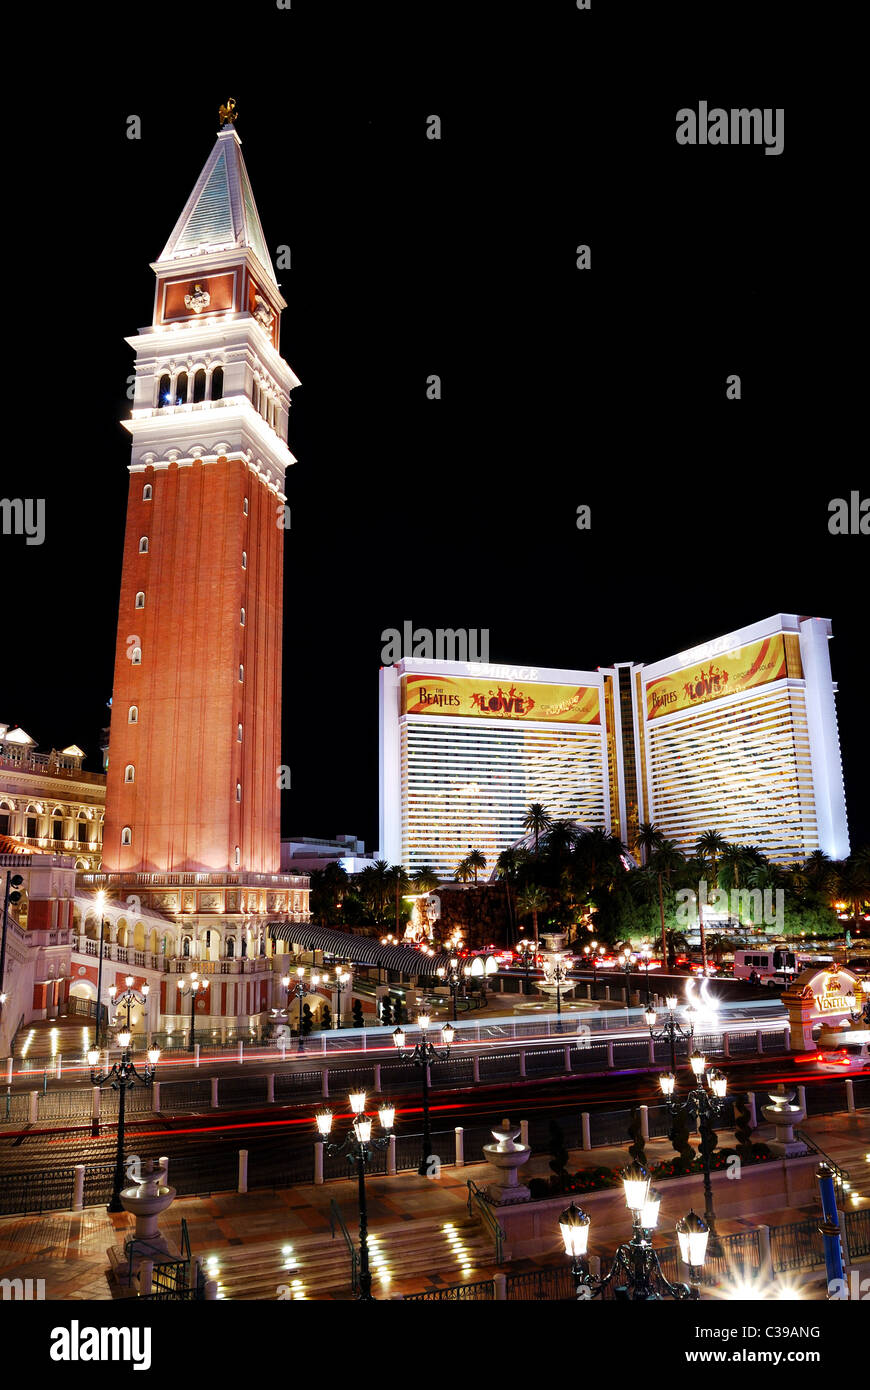 Venetian and Mirage Hotel Casino with clock tower illuminated with colorful  lights at night, Las Vegas Stock Photo - Alamy